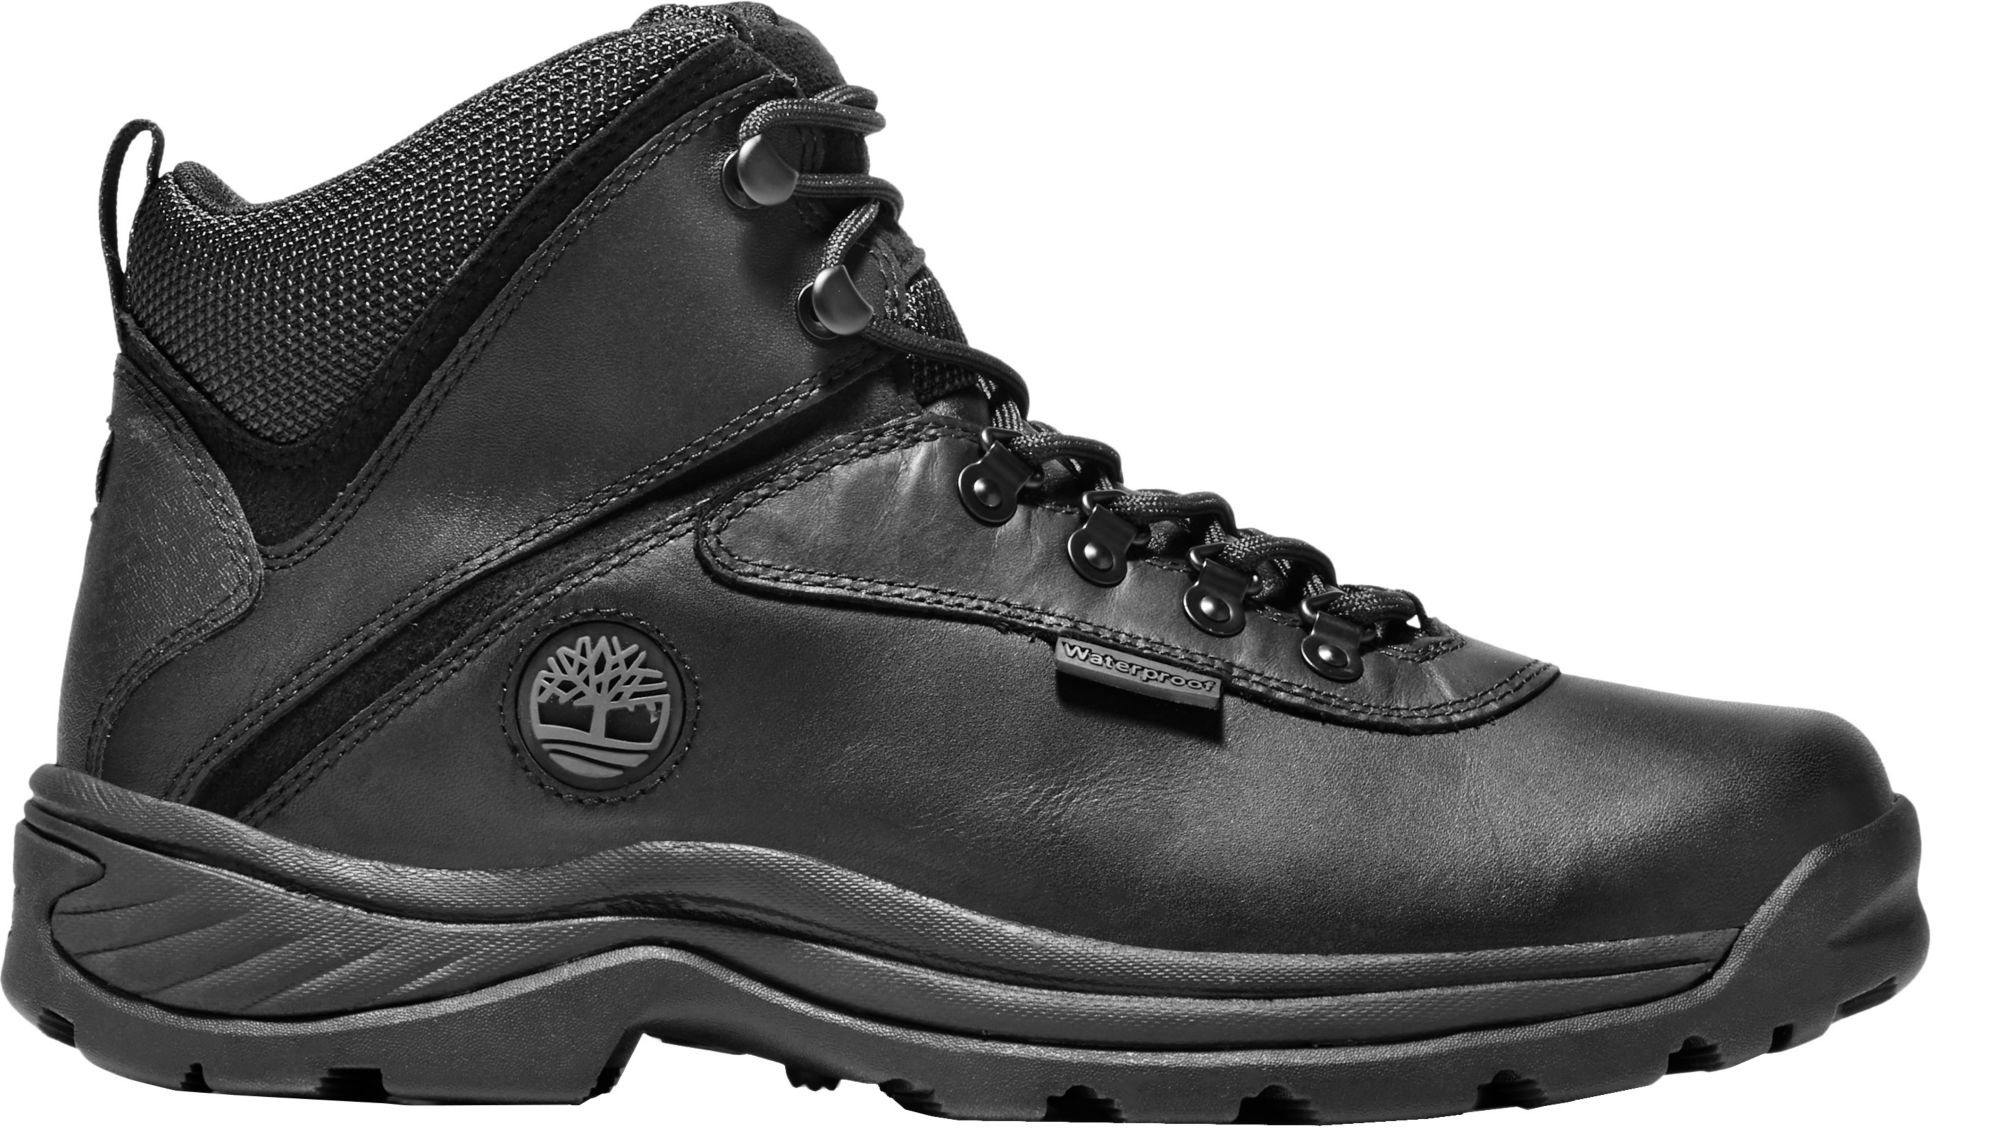 timberland men's white ledge mid waterproof ankle boot review